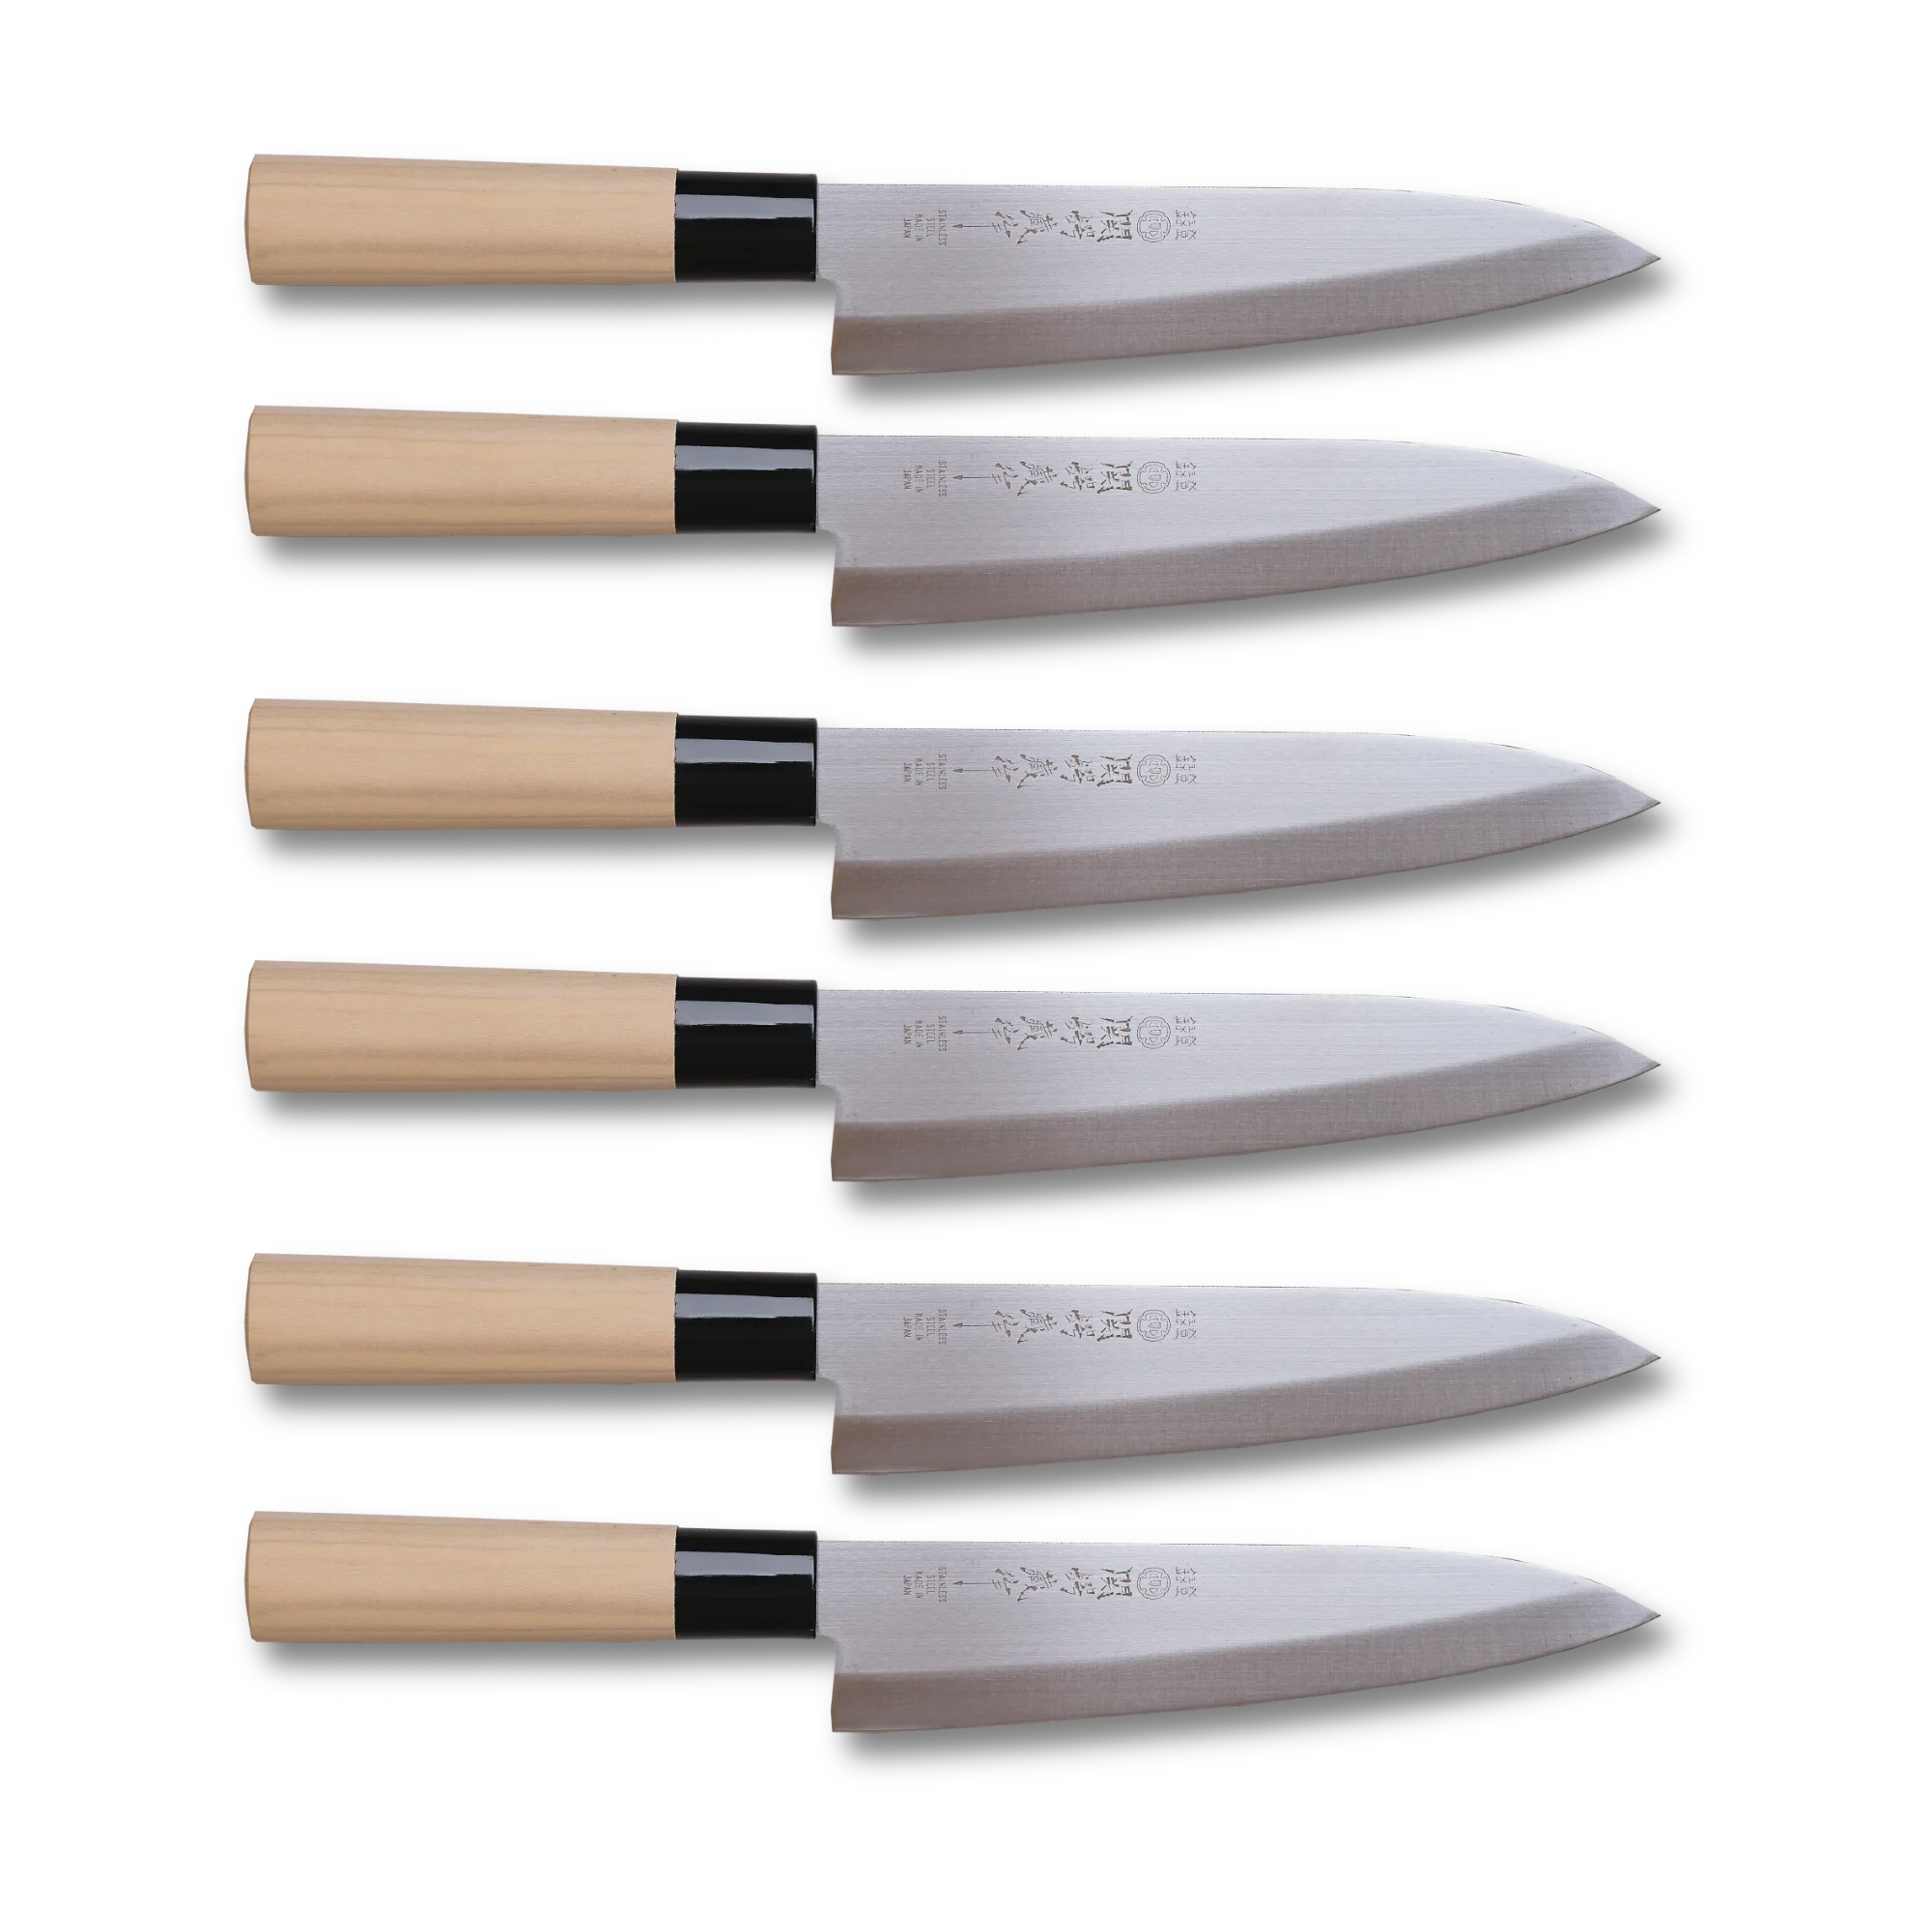 TSUBAZO GYUTO KNIFE 180 SIX BUNDLE FOR RESTAURANTS - Stainless Steel Blade - Made in Japan